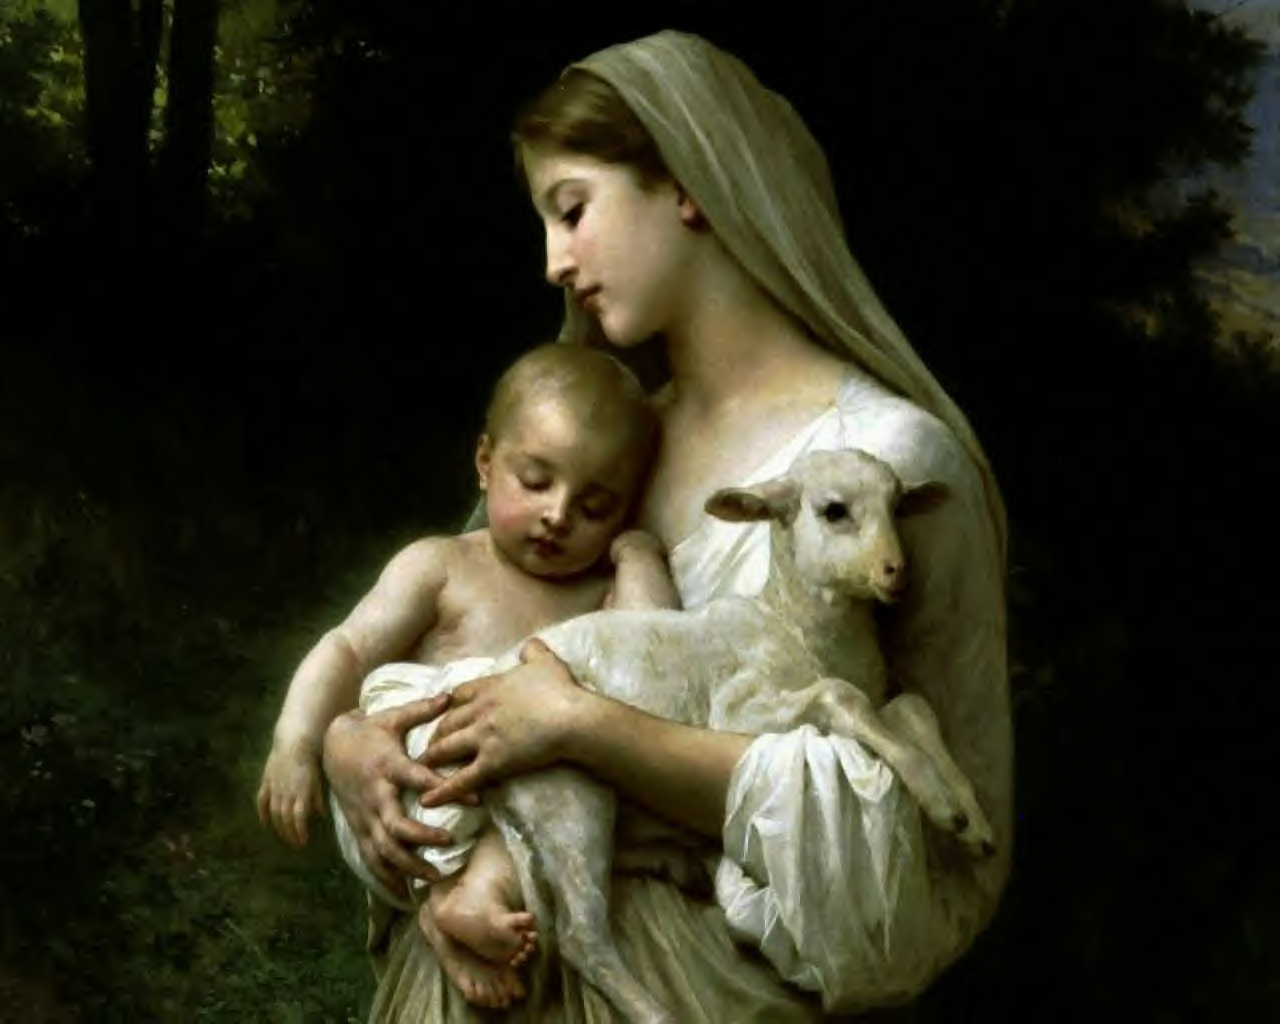 Virgin Mary photos and Virgin Mary wallpapers The Blessed Virgin Mary